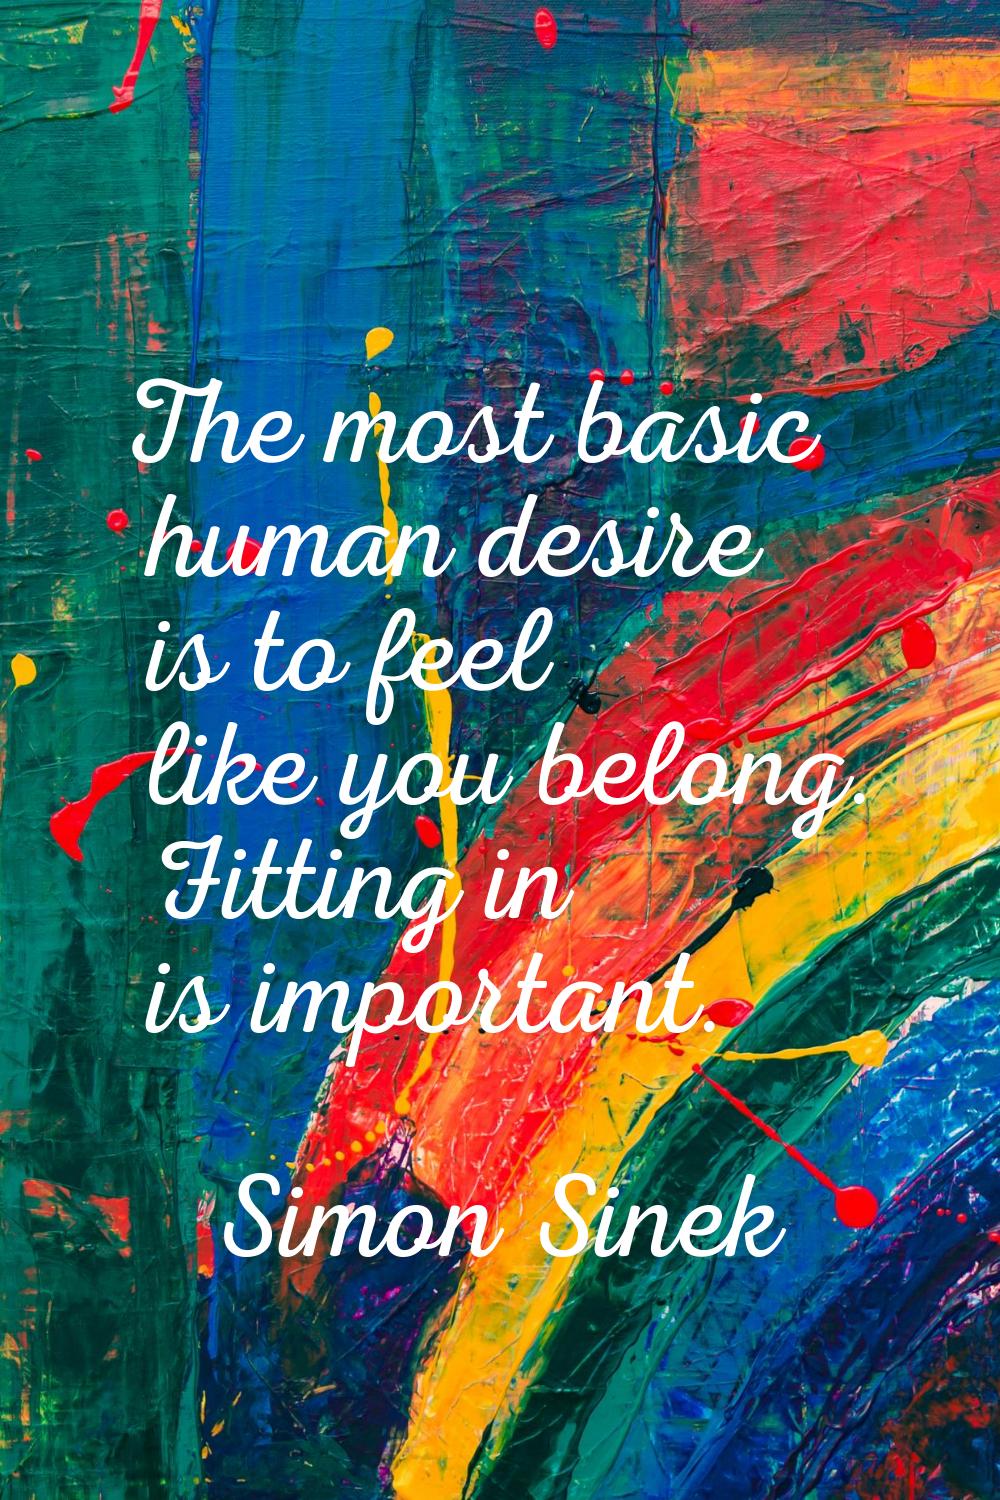 The most basic human desire is to feel like you belong. Fitting in is important.